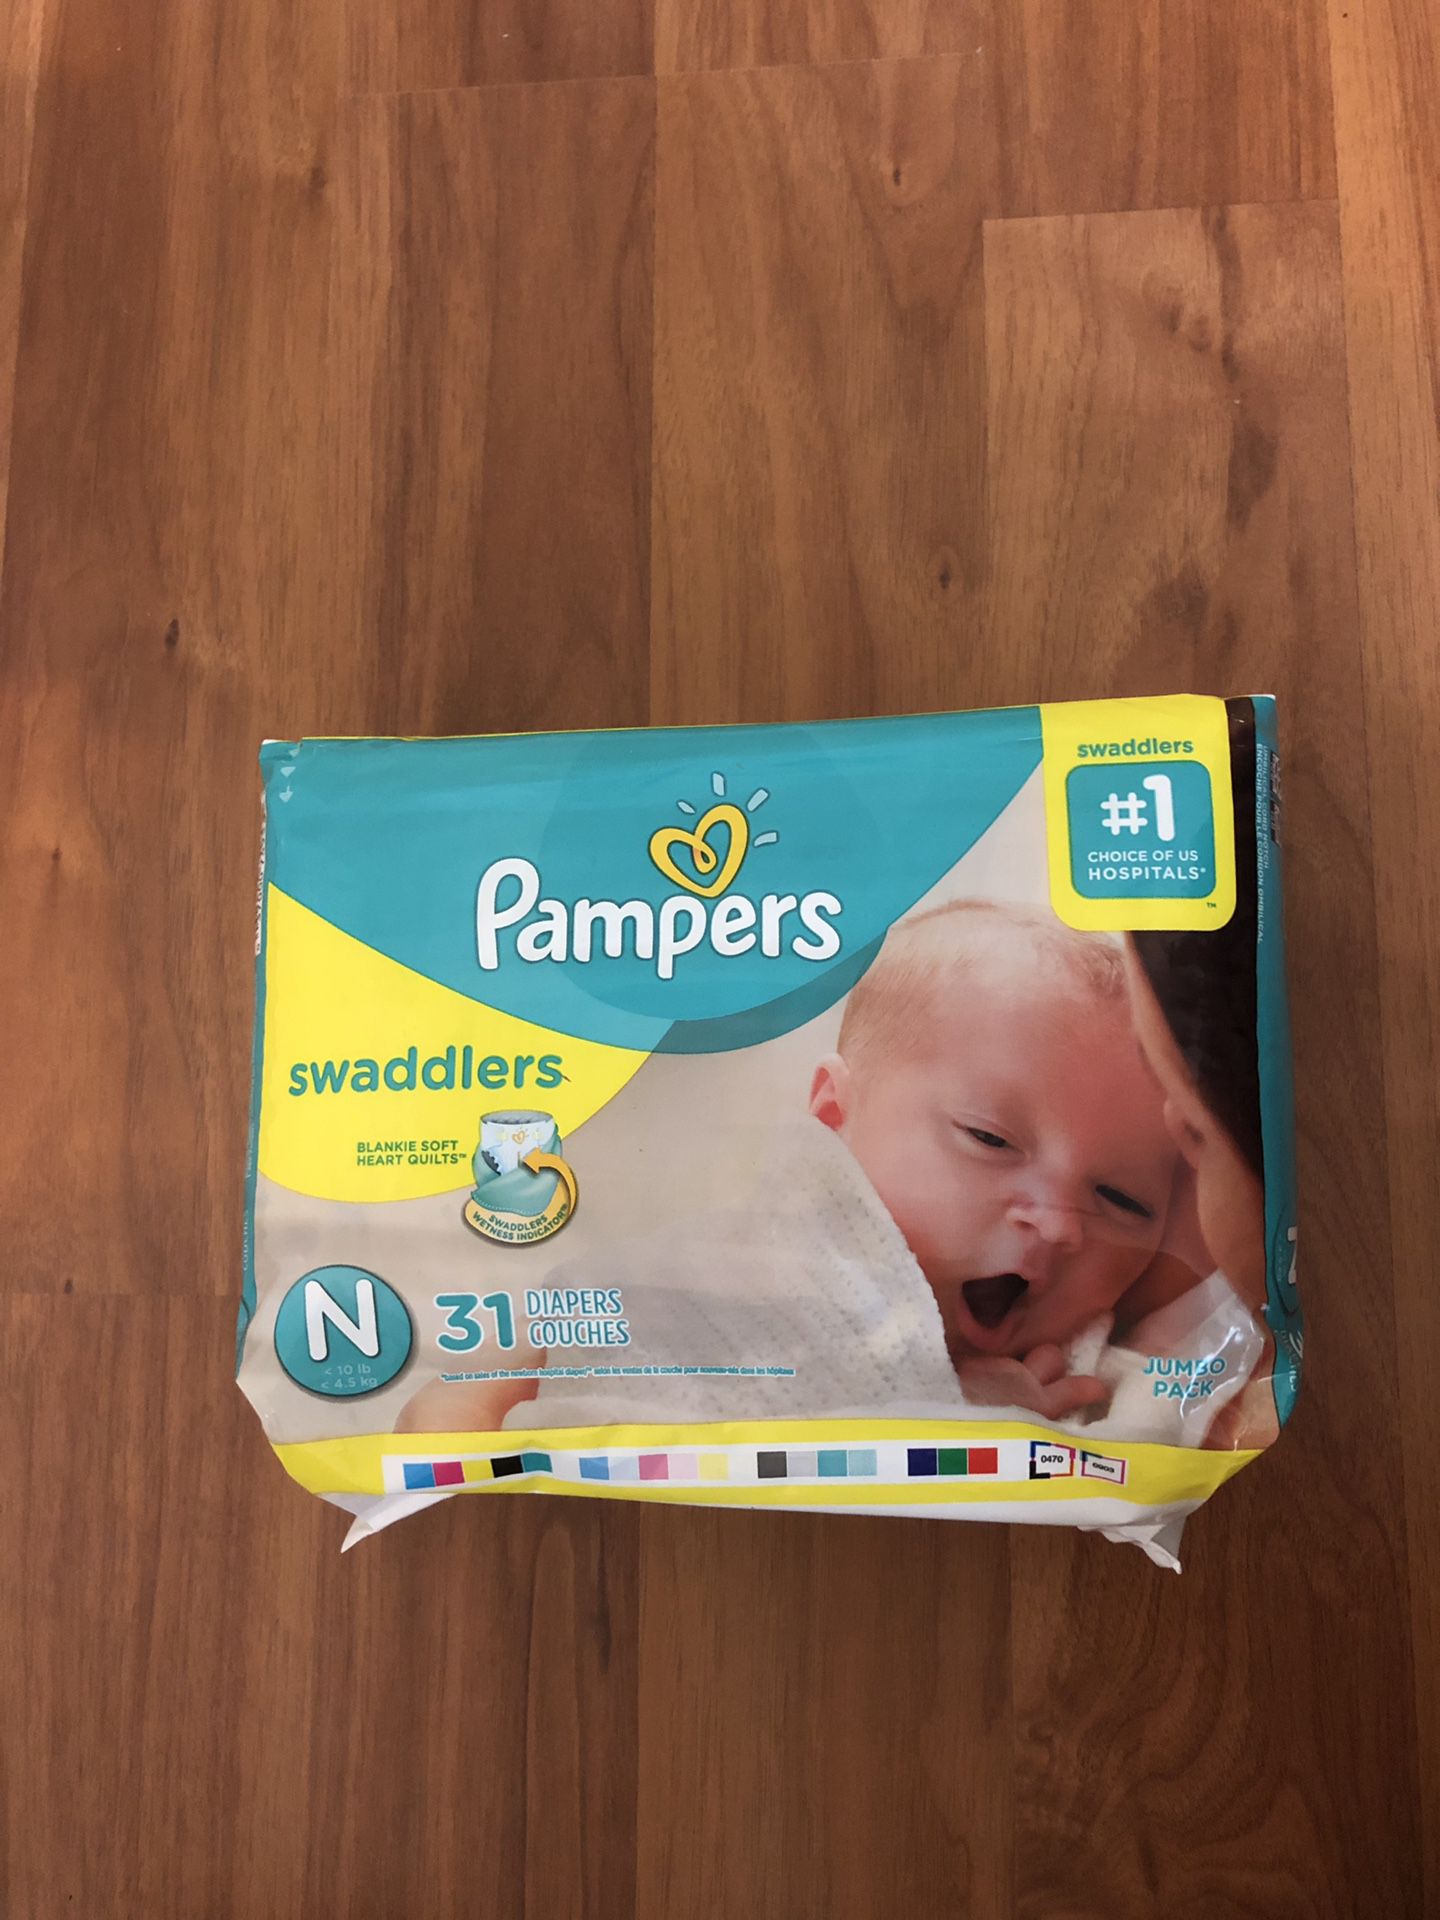 Pampers swaddlers newborn, 31 ct. Store price $10.